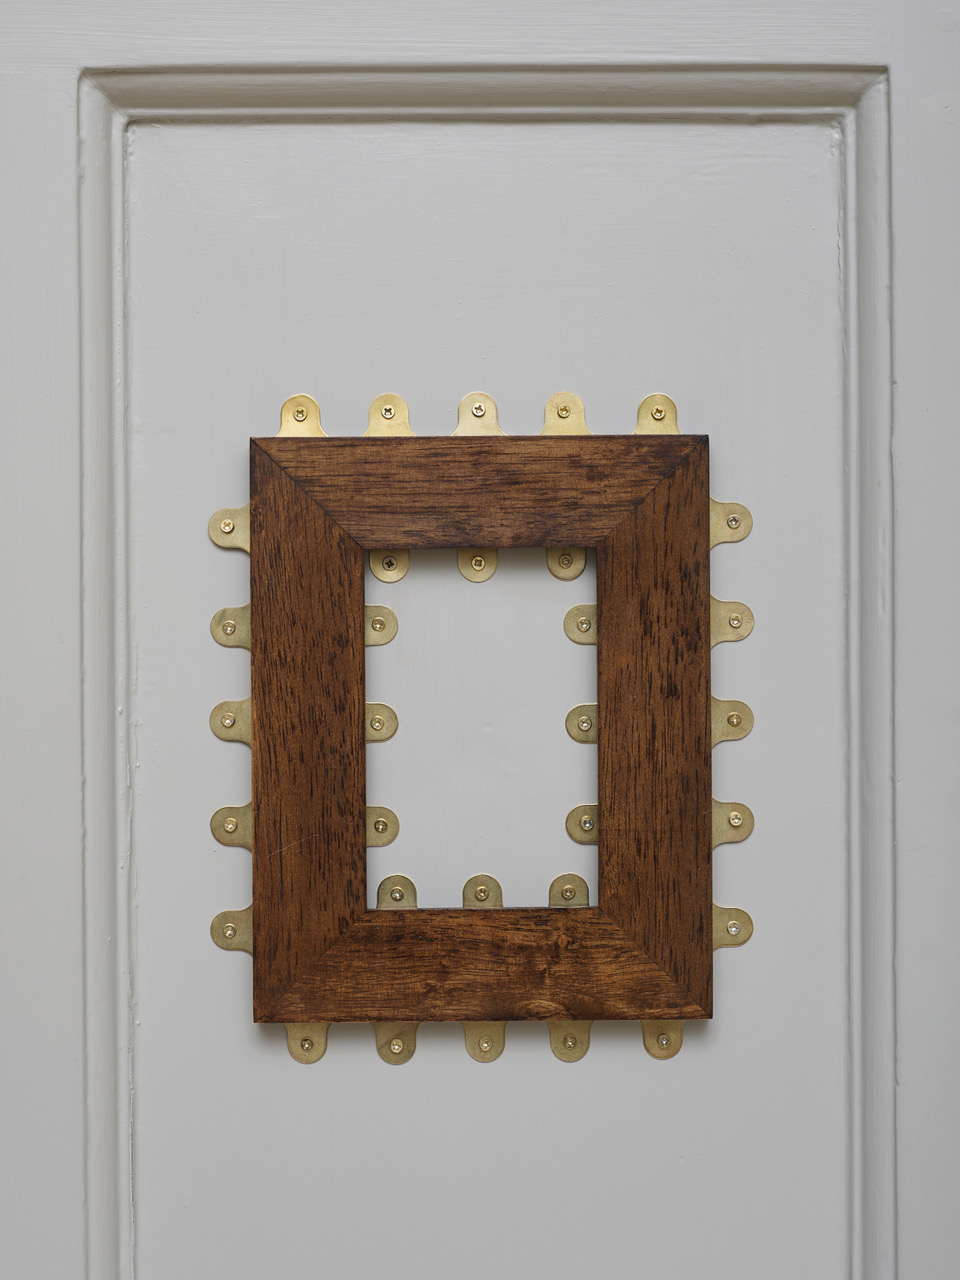 Nicky Hirst 'The Electorate', 'Truant' mirror plated frame, 25×21cm 2022, installation photography by Andy Keate